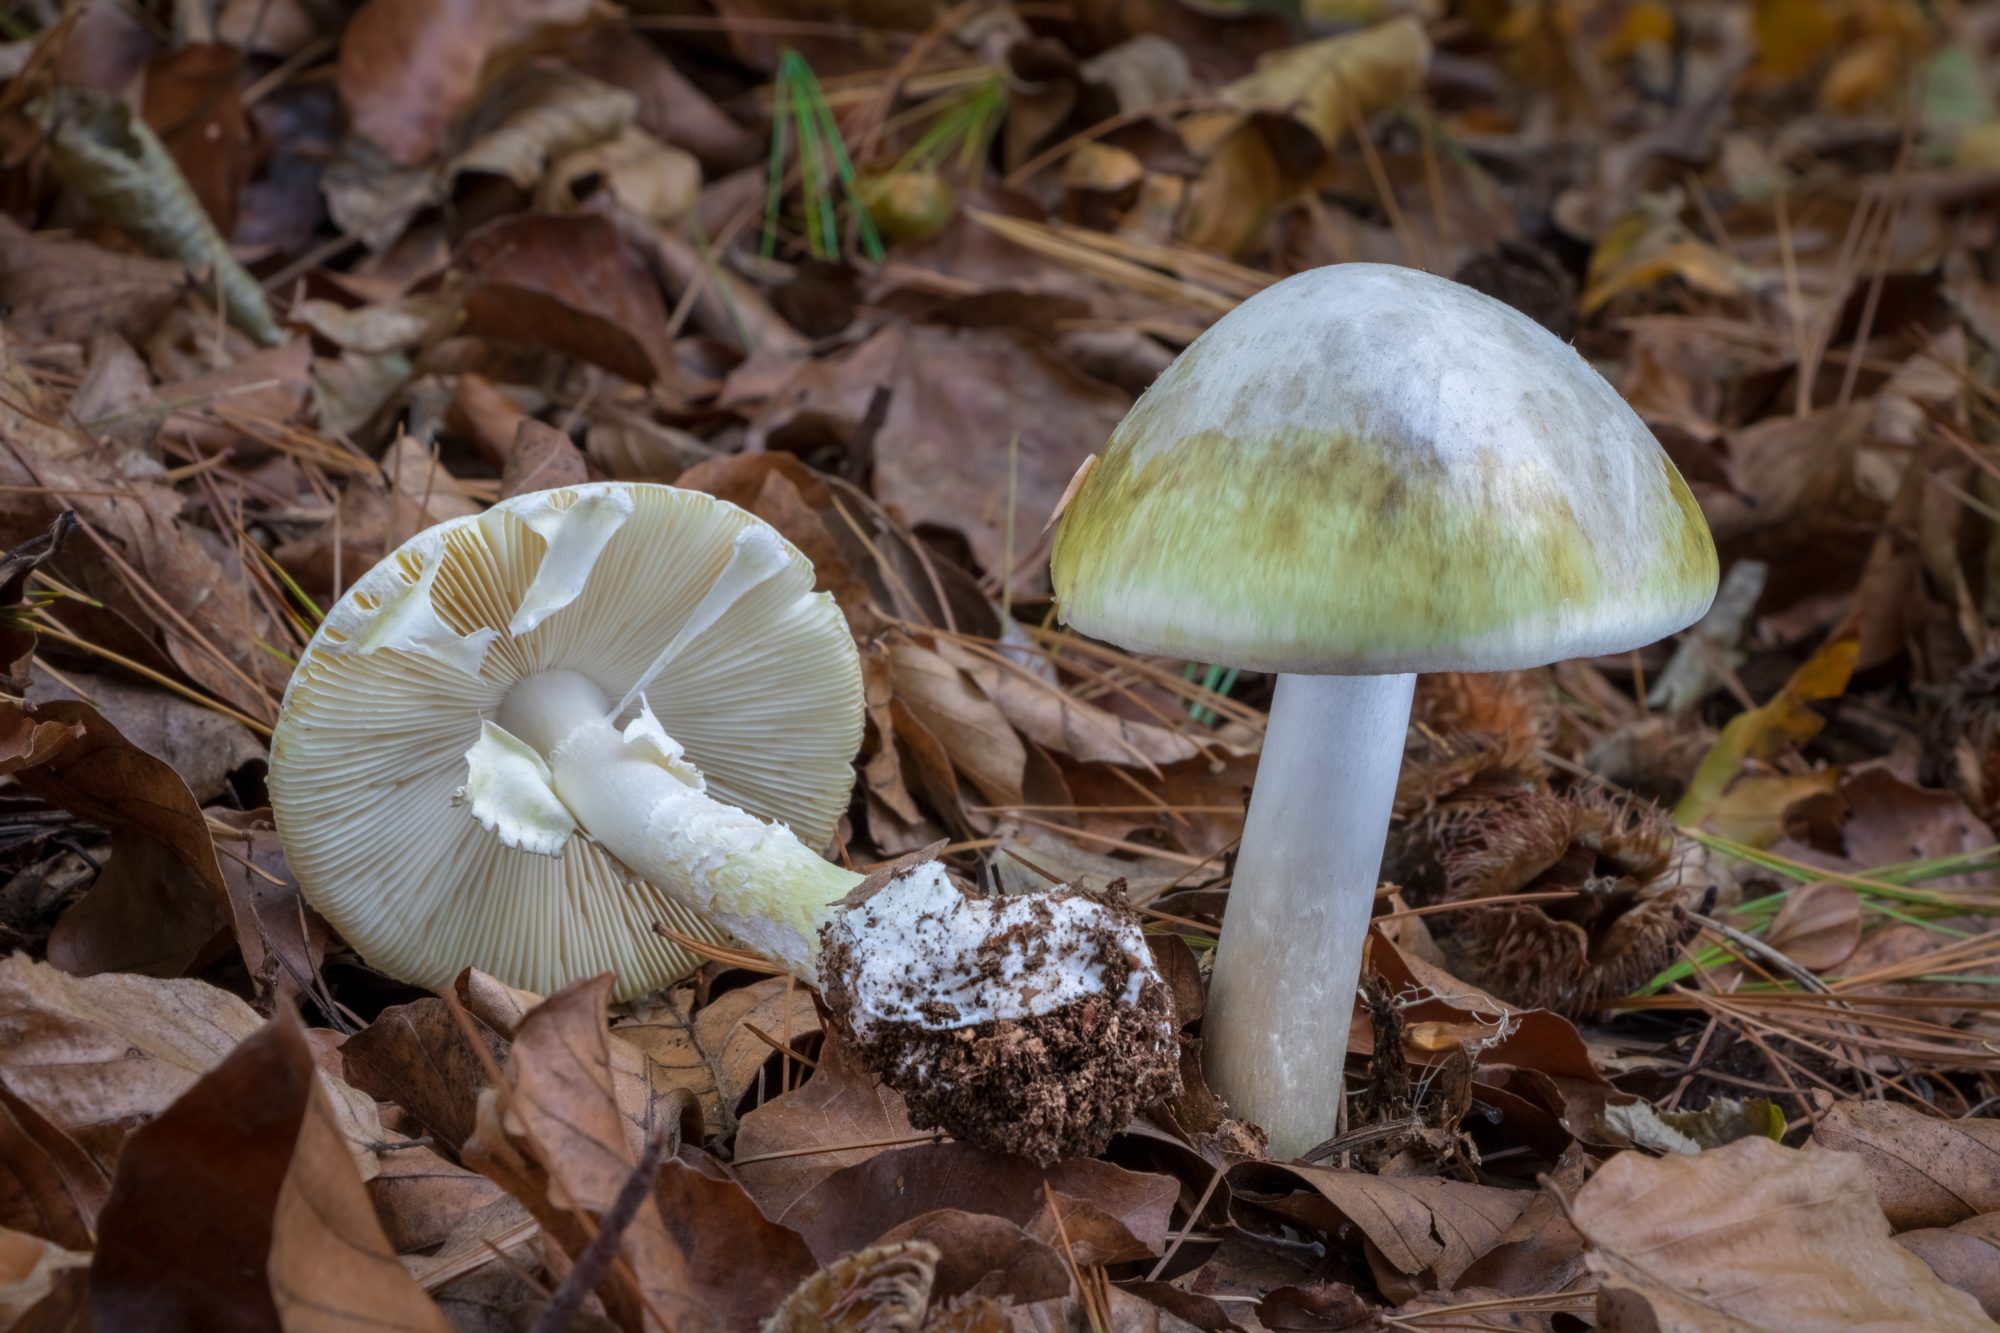 Amanita phalloides commonly known as the death cap - white mushroom in foliage